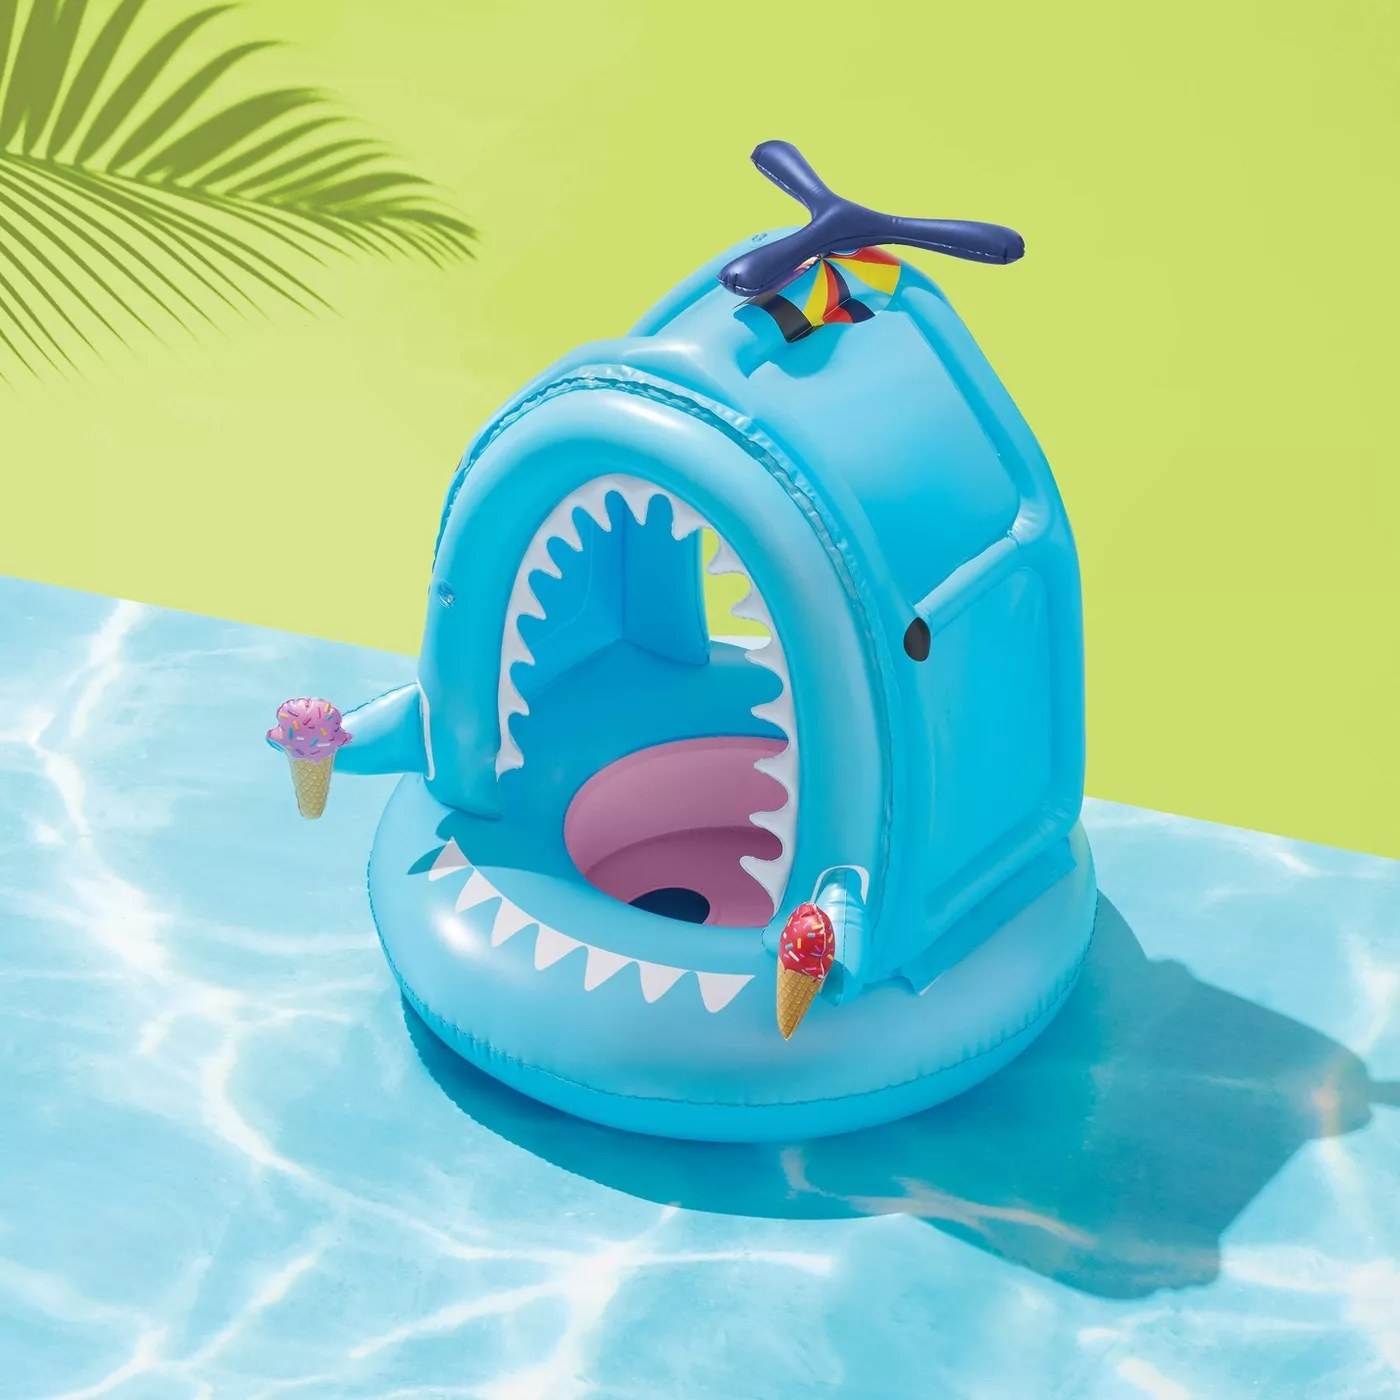 The shark pool float with a detachable canopy and ice cream cone accents on each side